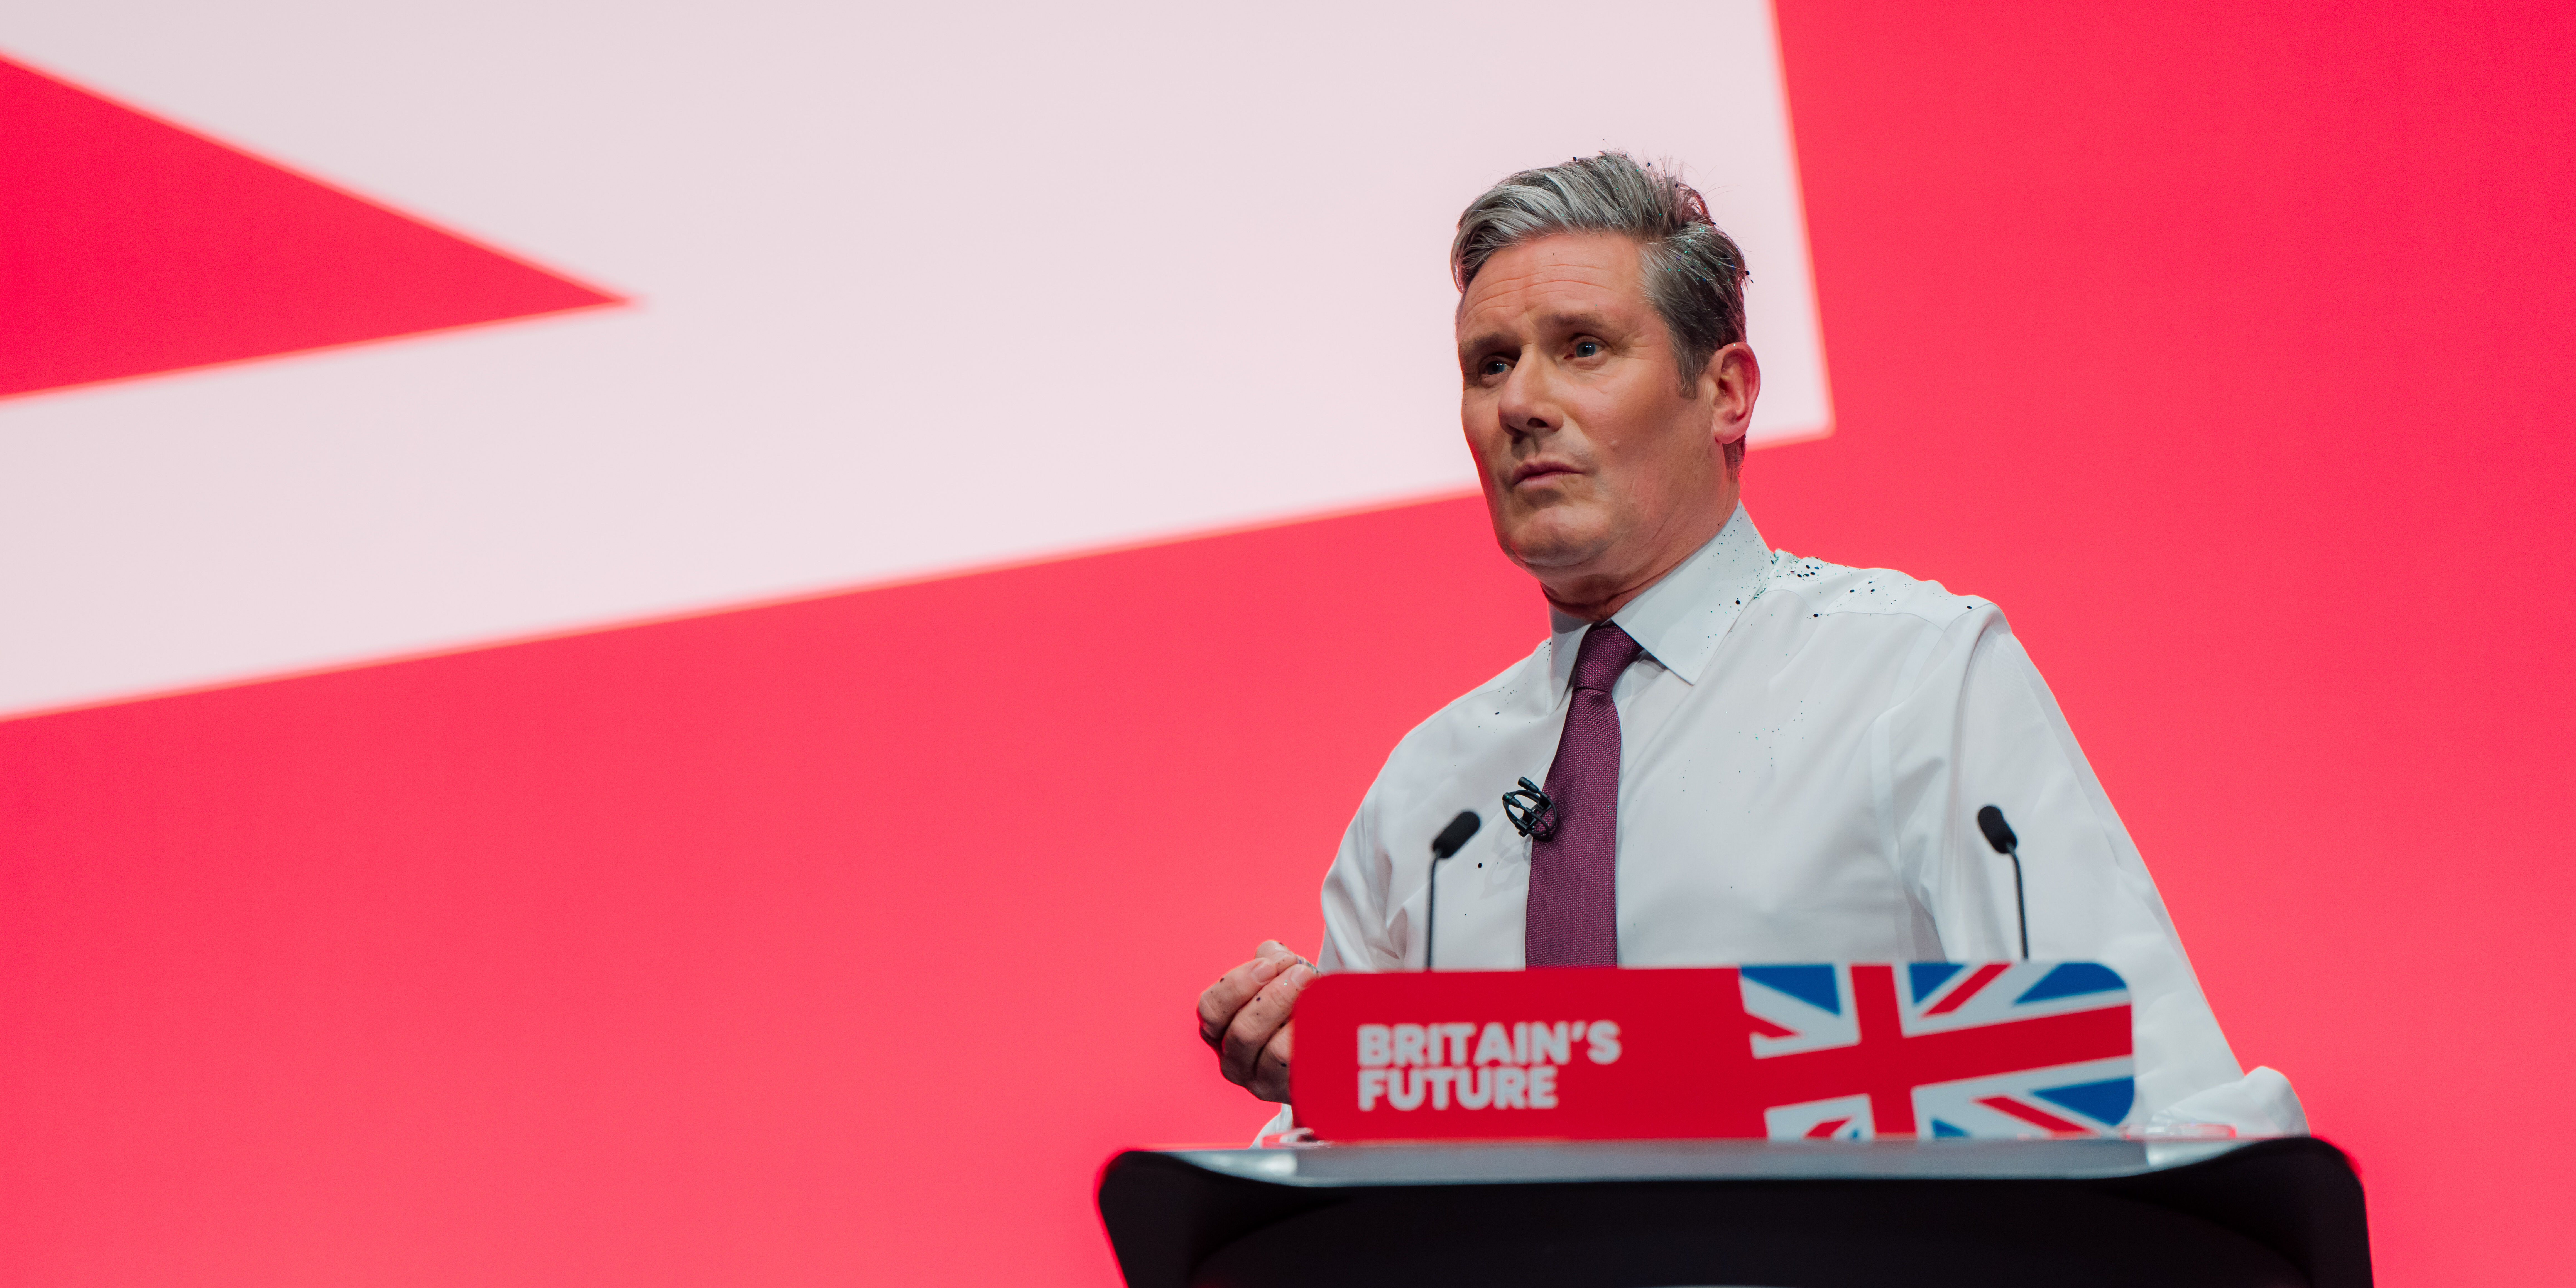 Keir Starmer speaking at Labour Party conference